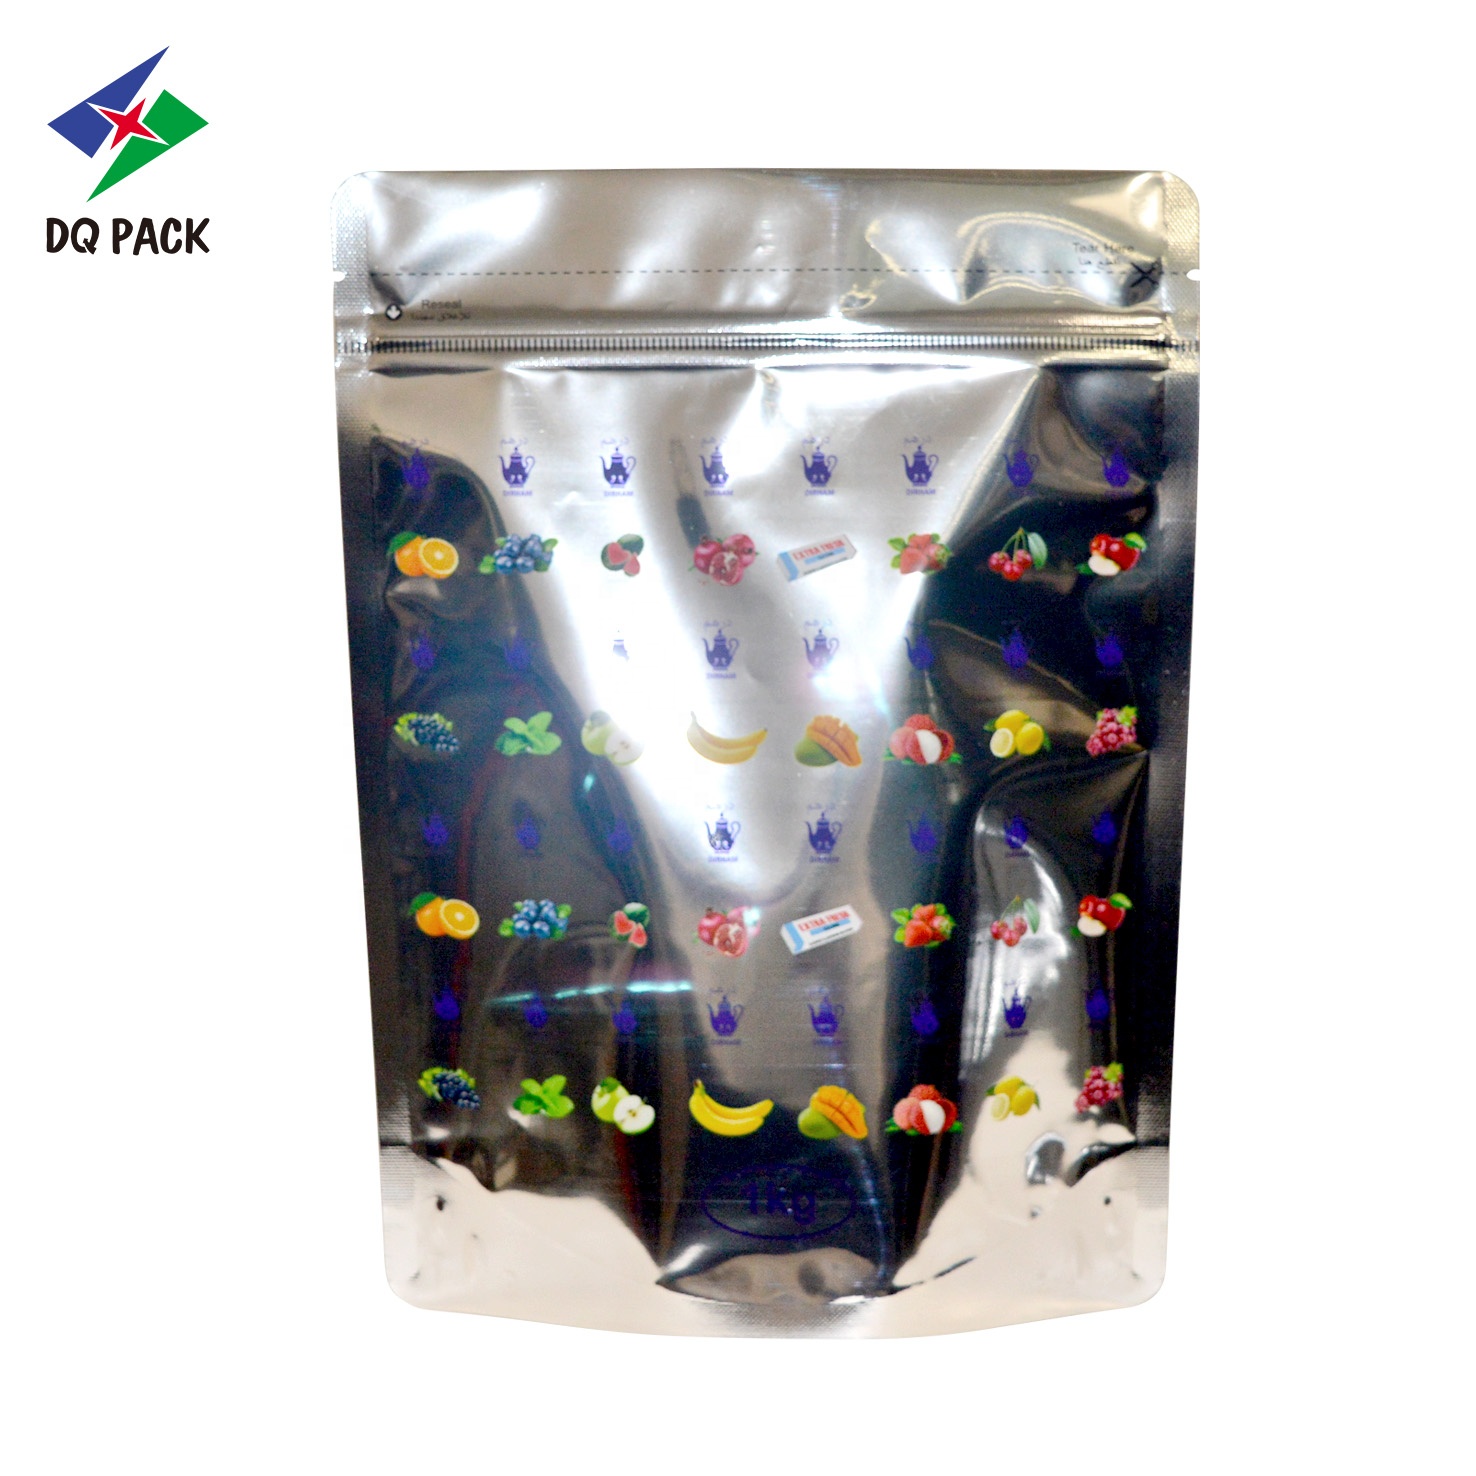 DQ PACK Factory China Laminated Aluminum Foil Zip Lock Bag Stand Up Foil Pouch Candy Bag